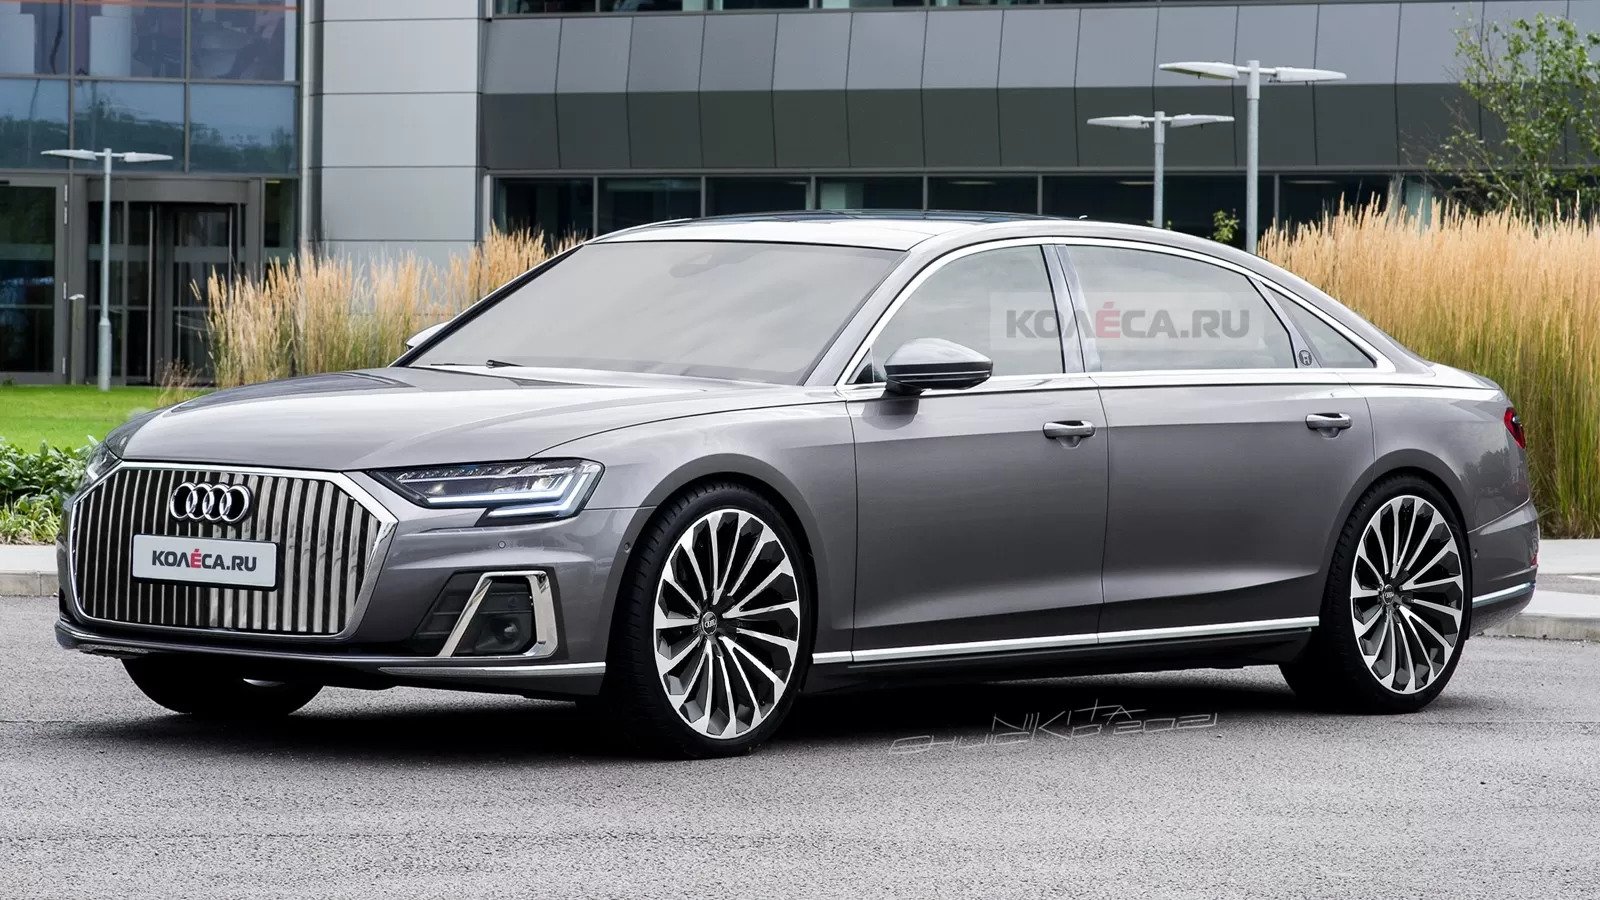 Long-Rumored Audi A8 L Horch Comes To Life In Detailed Renderings |  Carscoops